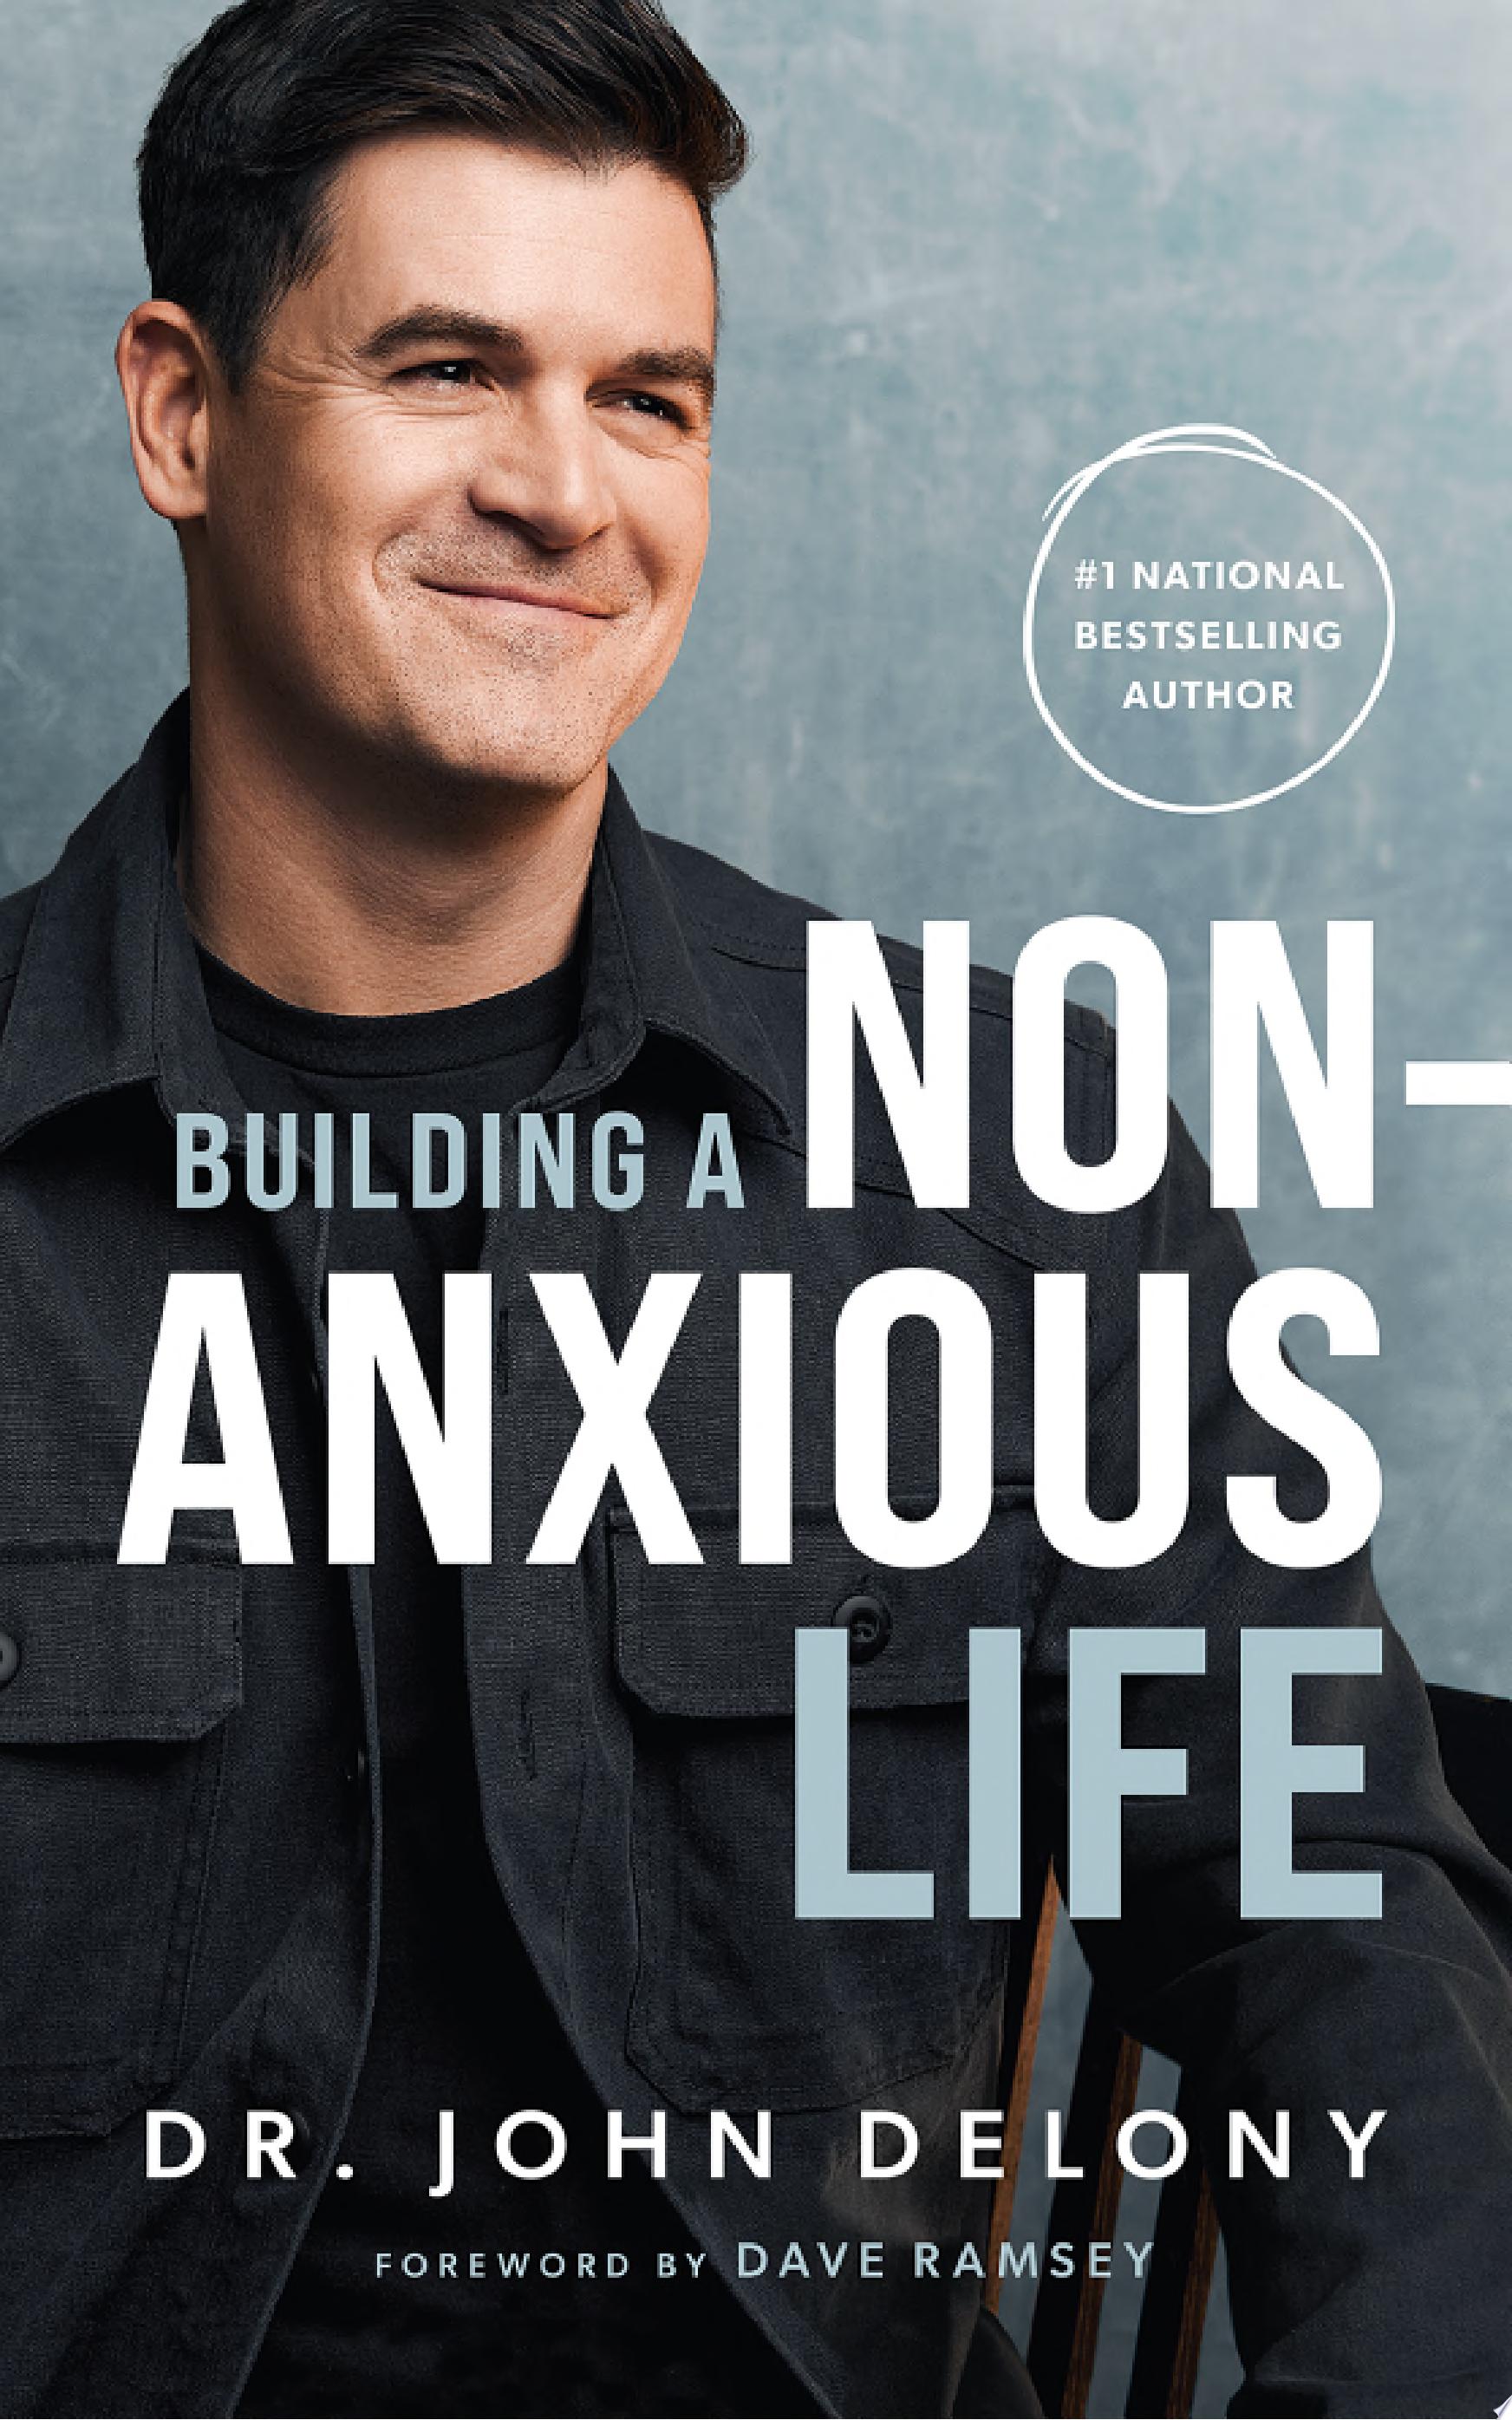 Image for "Building a Non-Anxious Life"